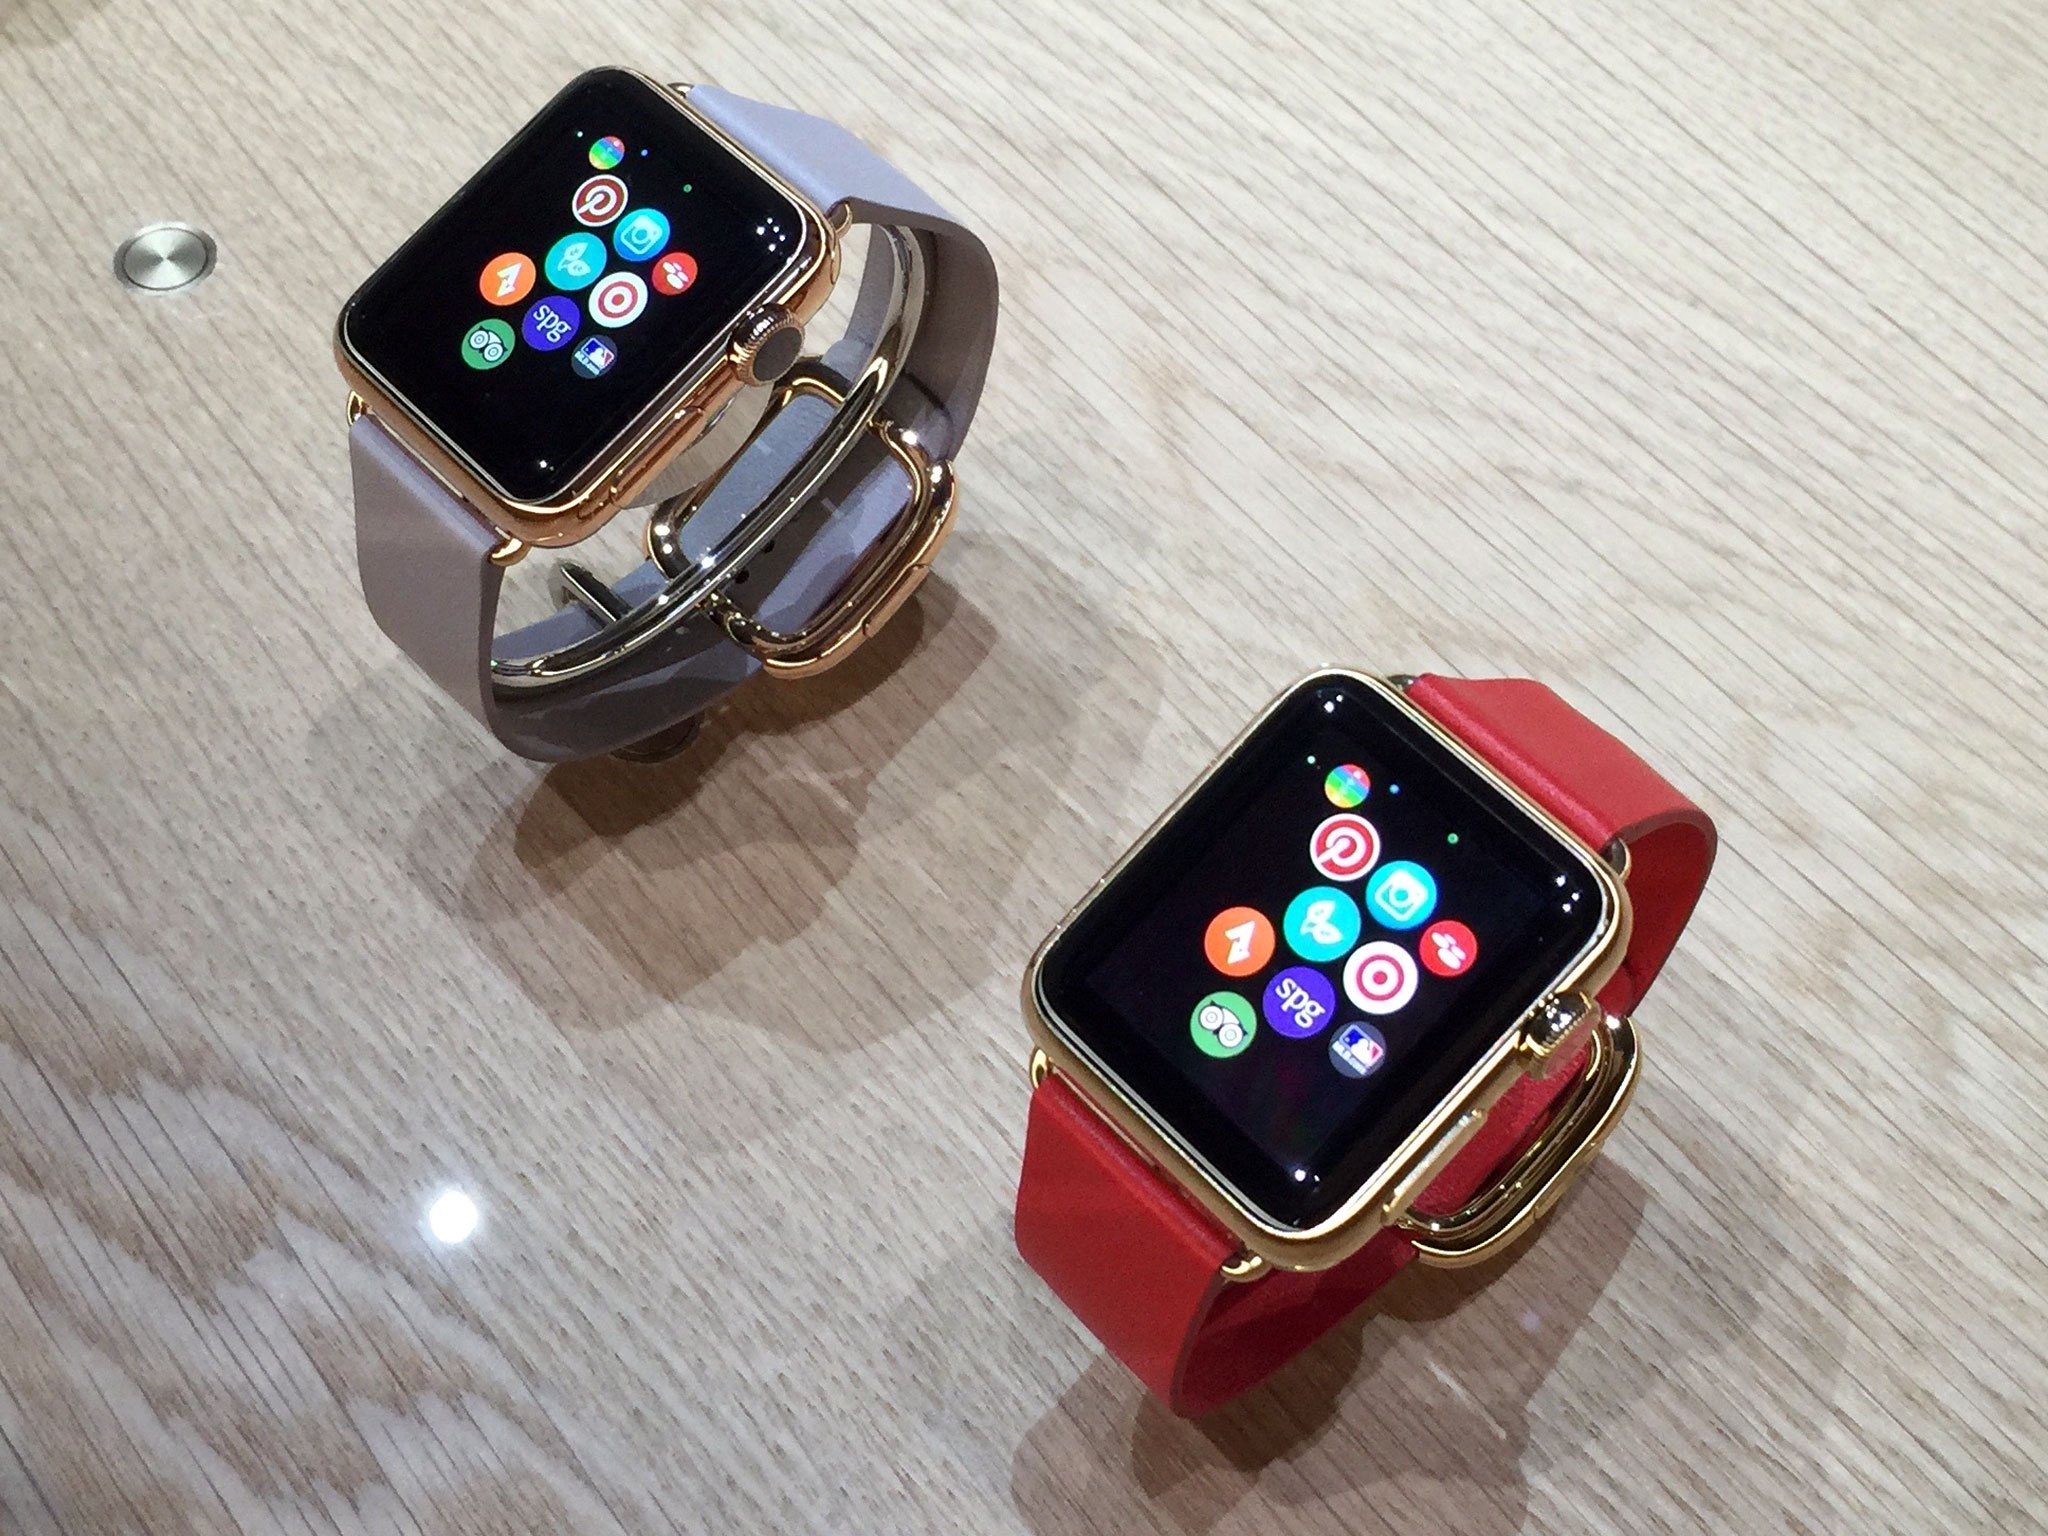 Apple Watch Edition and App Store apps